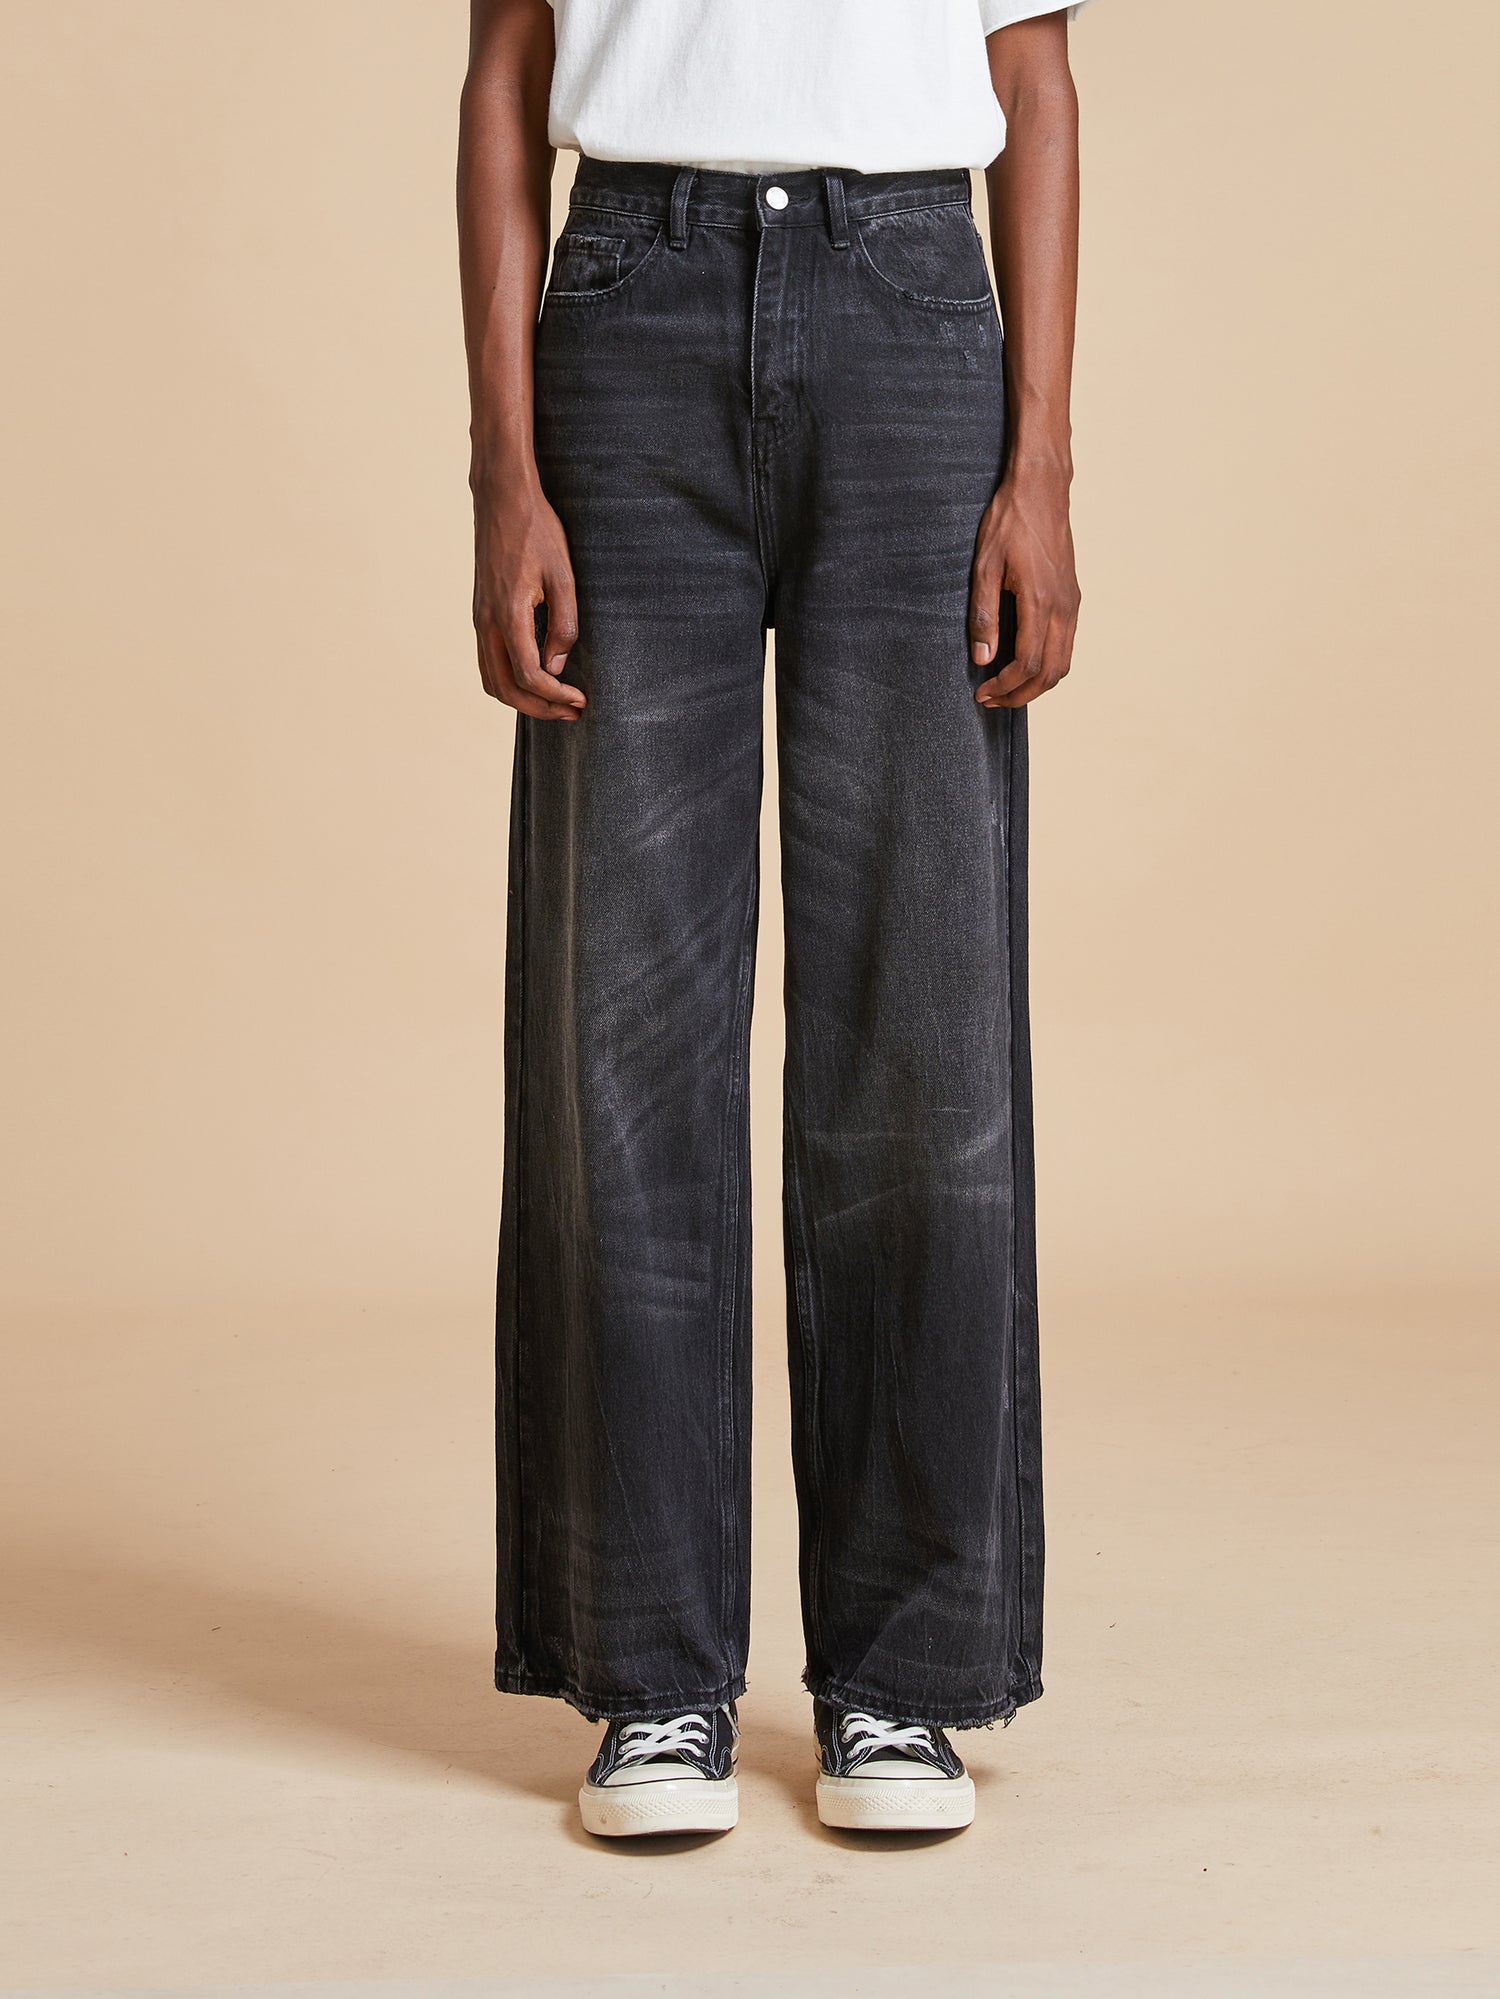 Looking for a pair of baggy jeans for so long and finally found